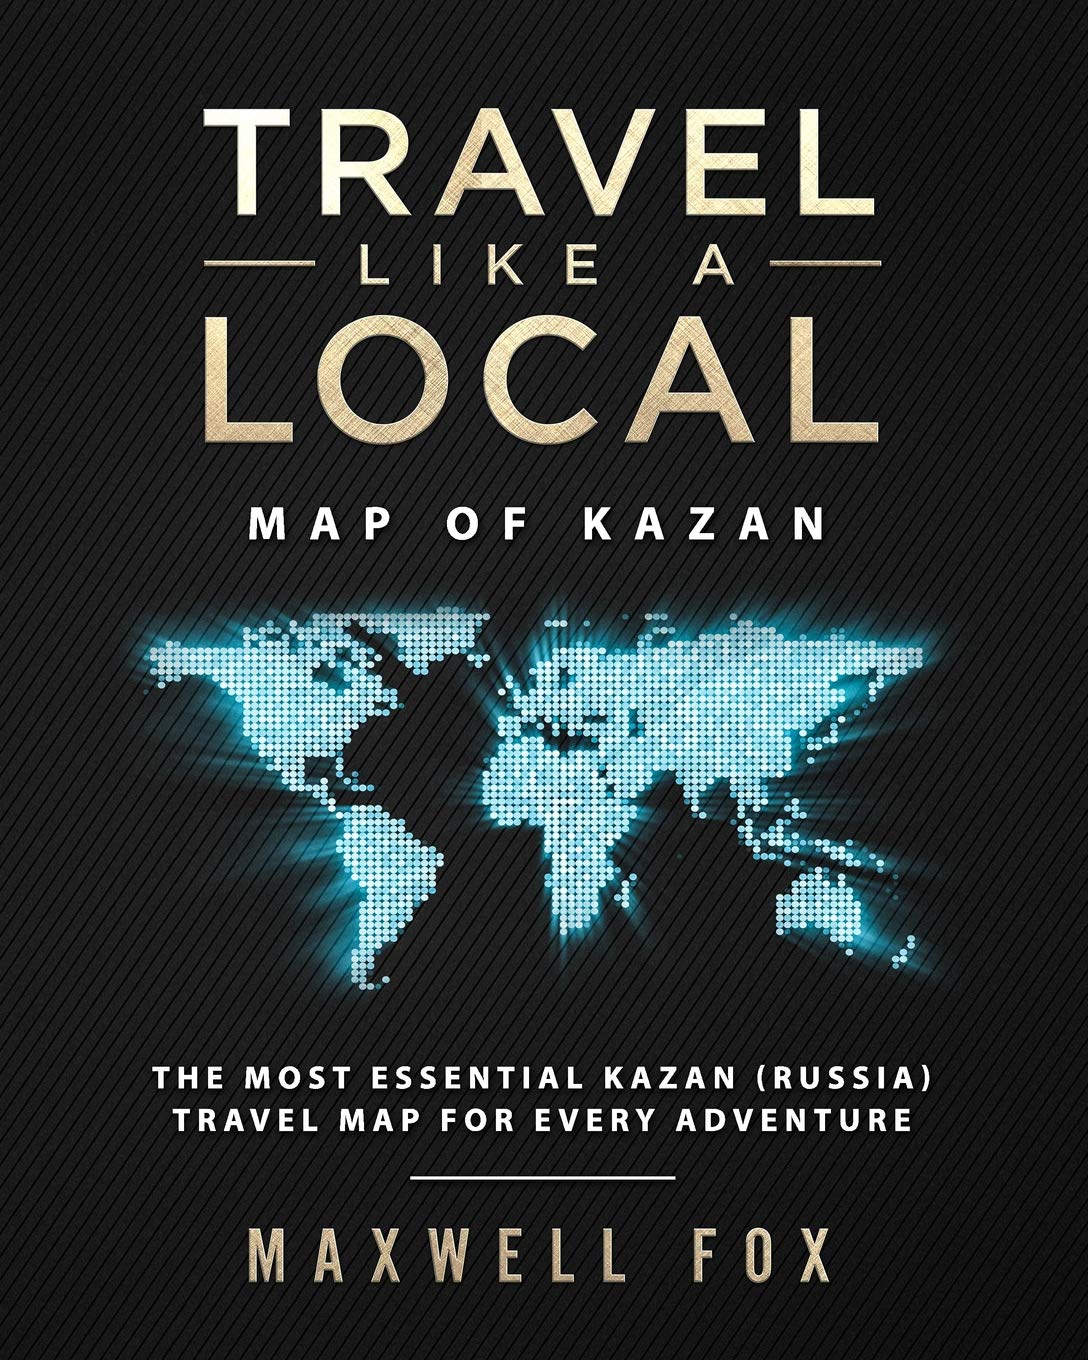 Travel Like a Local - Map of Kazan: The Most Essential Kazan (Russia) Travel Map for Every Adventure